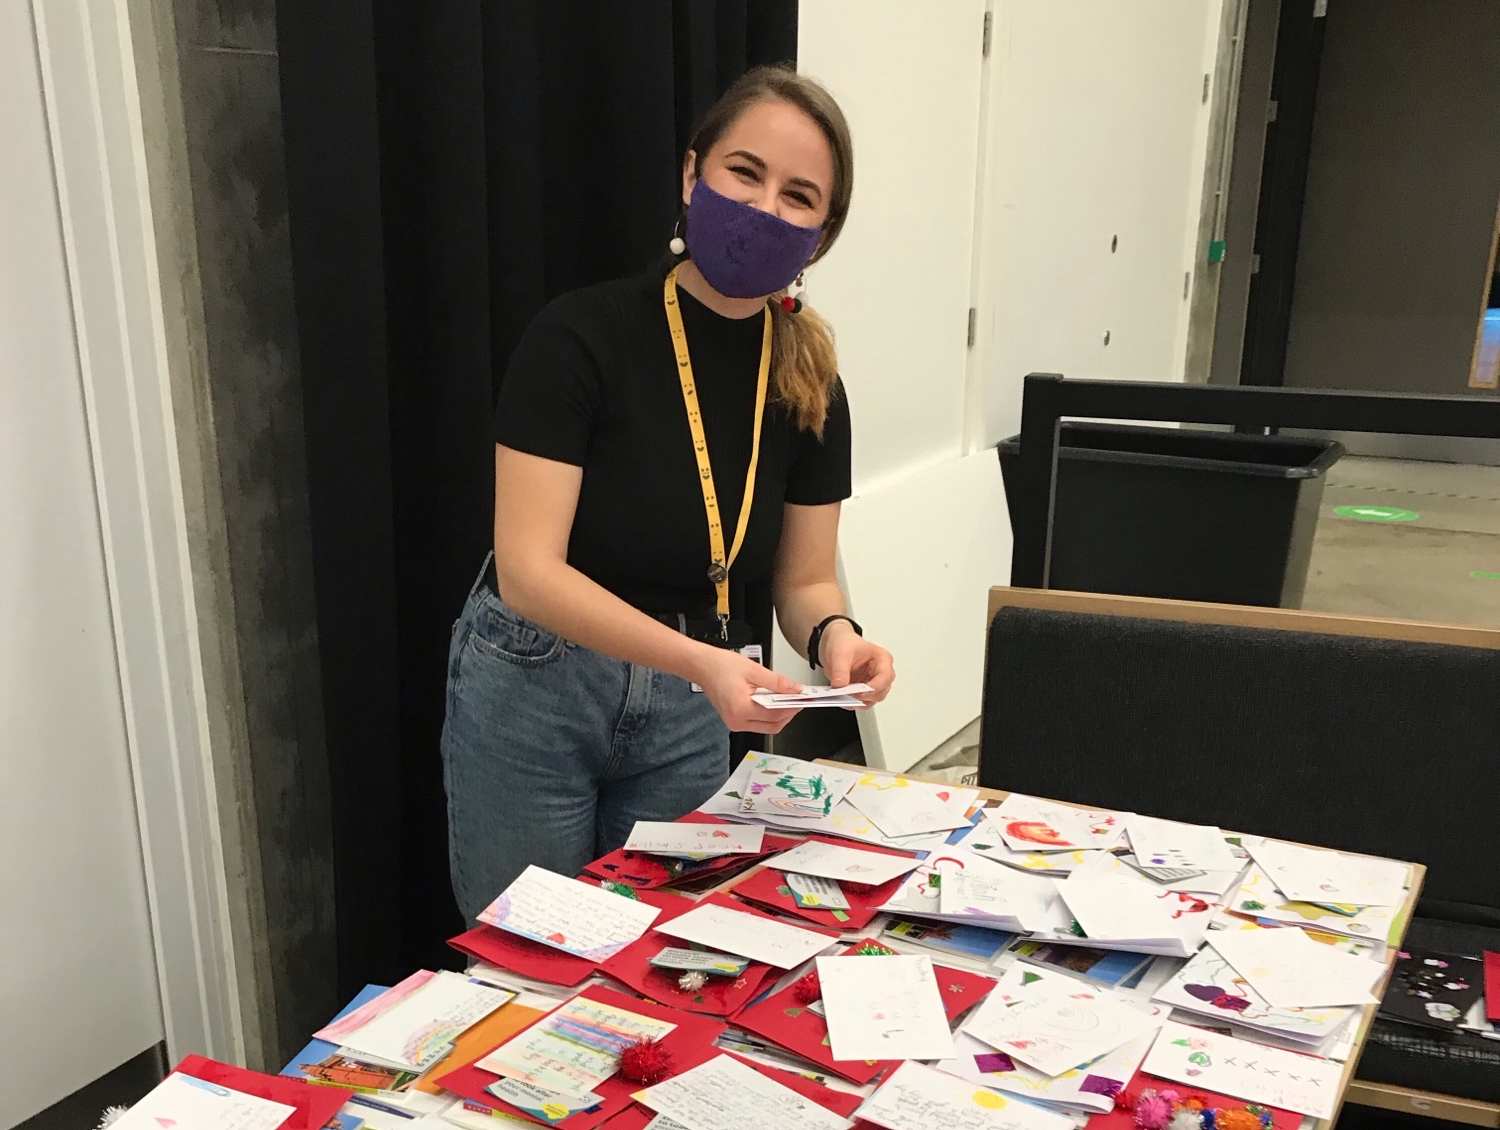 Manchester Met catering staff and student officers at the Students’ Union supported the project by volunteering to prepare both the care and craft packages